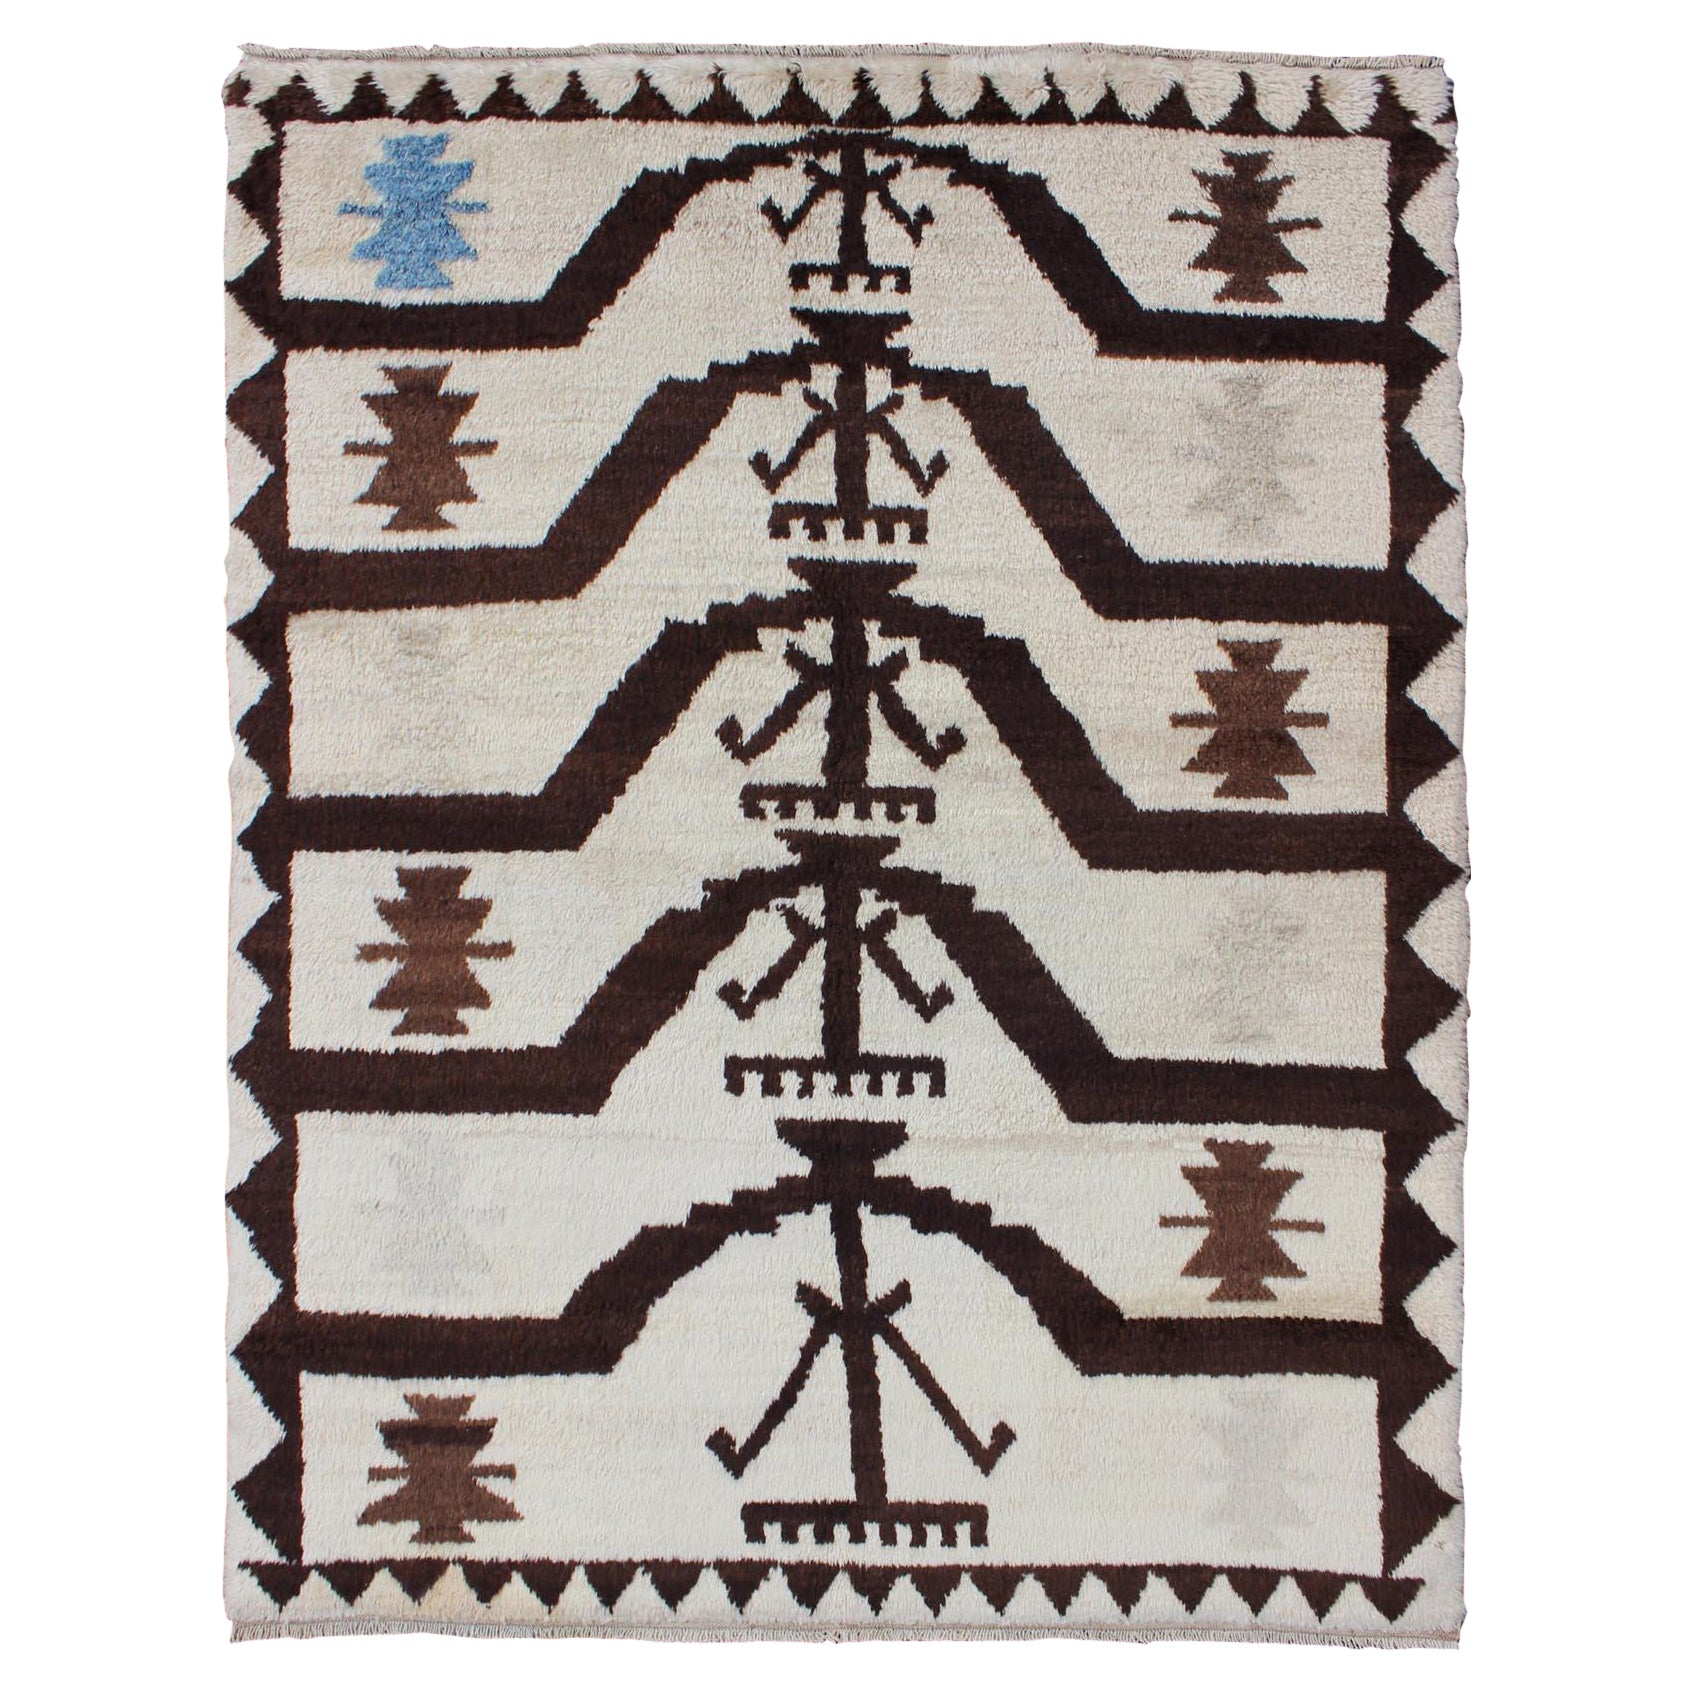 Turkish Tulu Carpet with Mid-Century Modern Design in Brown, Off-White and Blue